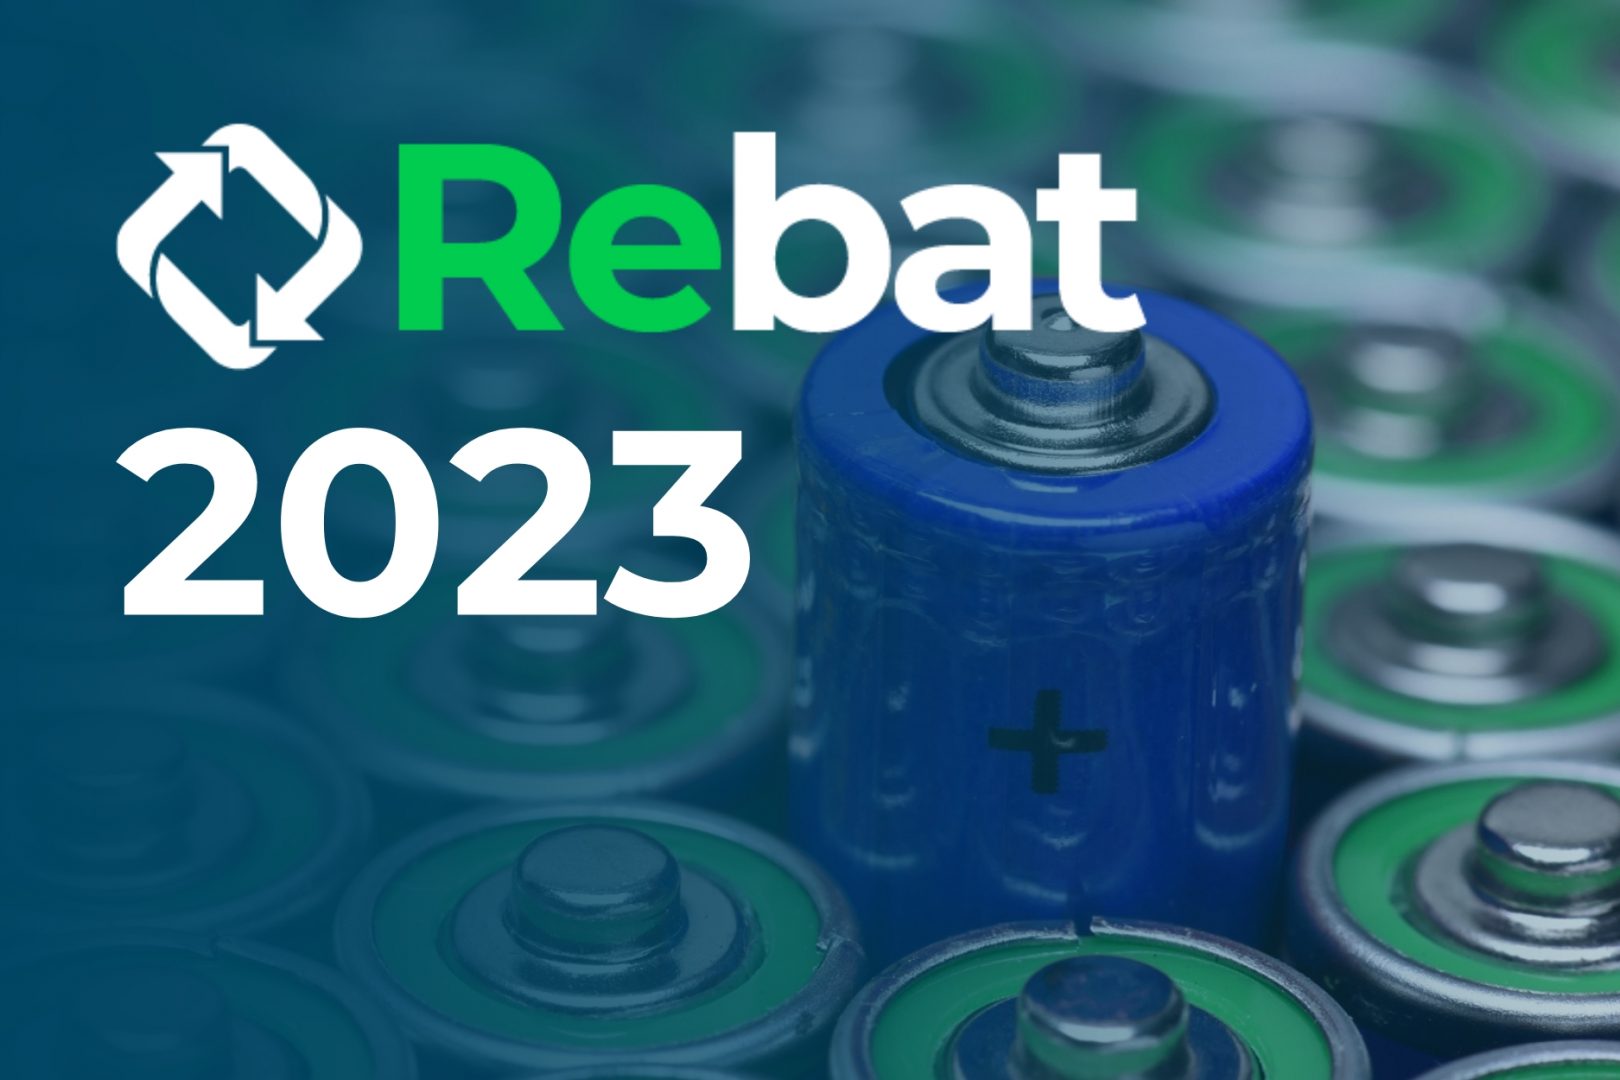 A collection of various batteries with a blue one in the foreground, overlayed by a translucent logo reading "Rebat 2023" with a recycling symbol.